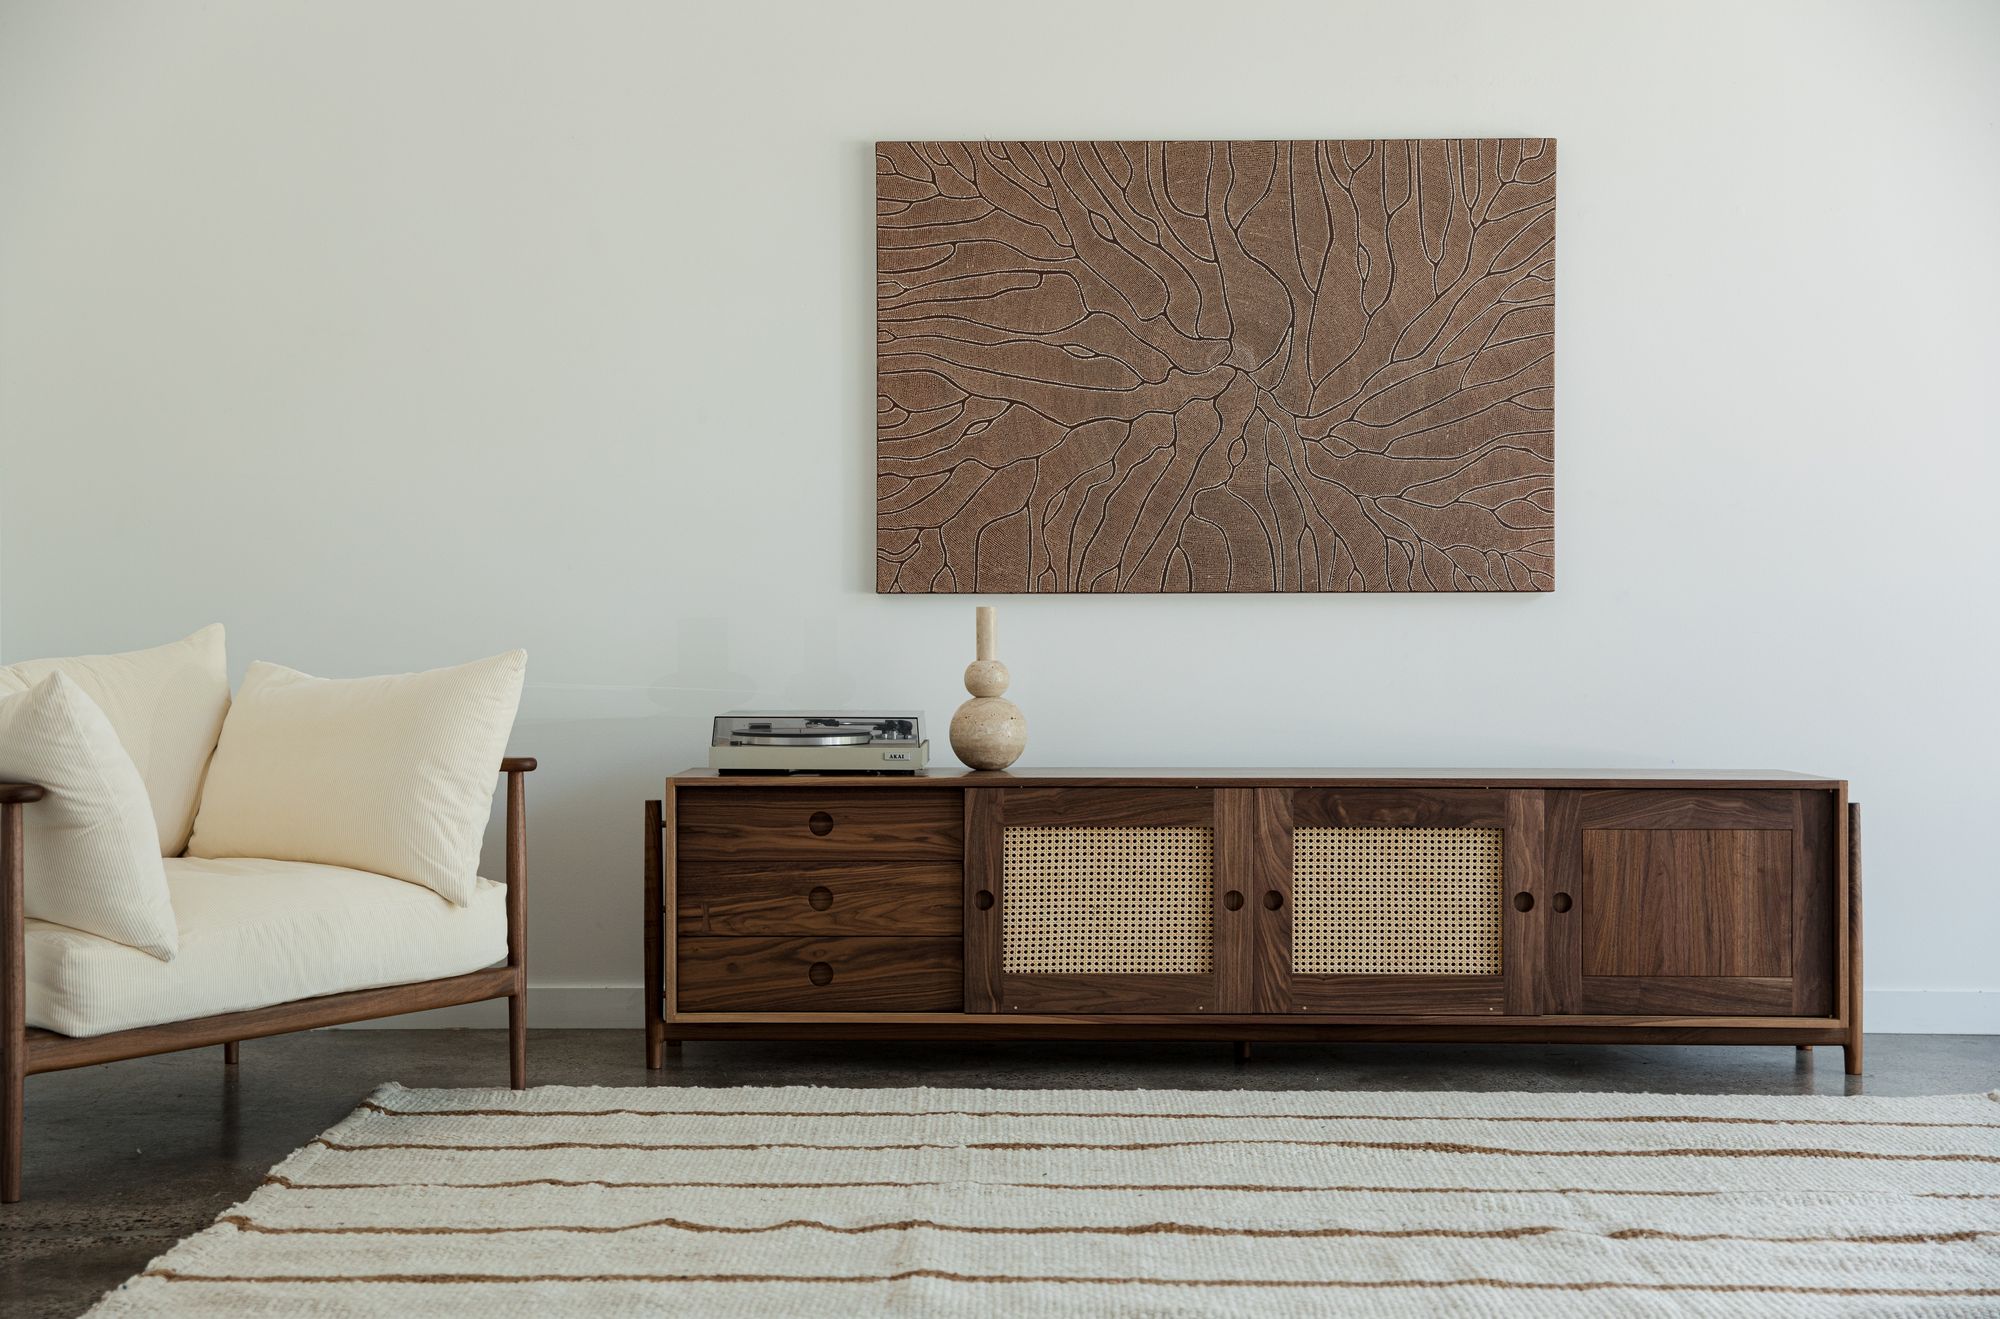 J.D Lee furniture: A minimalist living room setting featuring a light-colored sofa with plush white cushions, positioned adjacent to a finely crafted wooden console with wicker detailing on its doors and a sleek modern turntable on top. Above the console hangs a large square art piece, illustrating intricate abstract wooden patterns. The floor beneath is adorned with a textured off-white rug with wavy patterns, complementing the overall serene ambiance of the room.